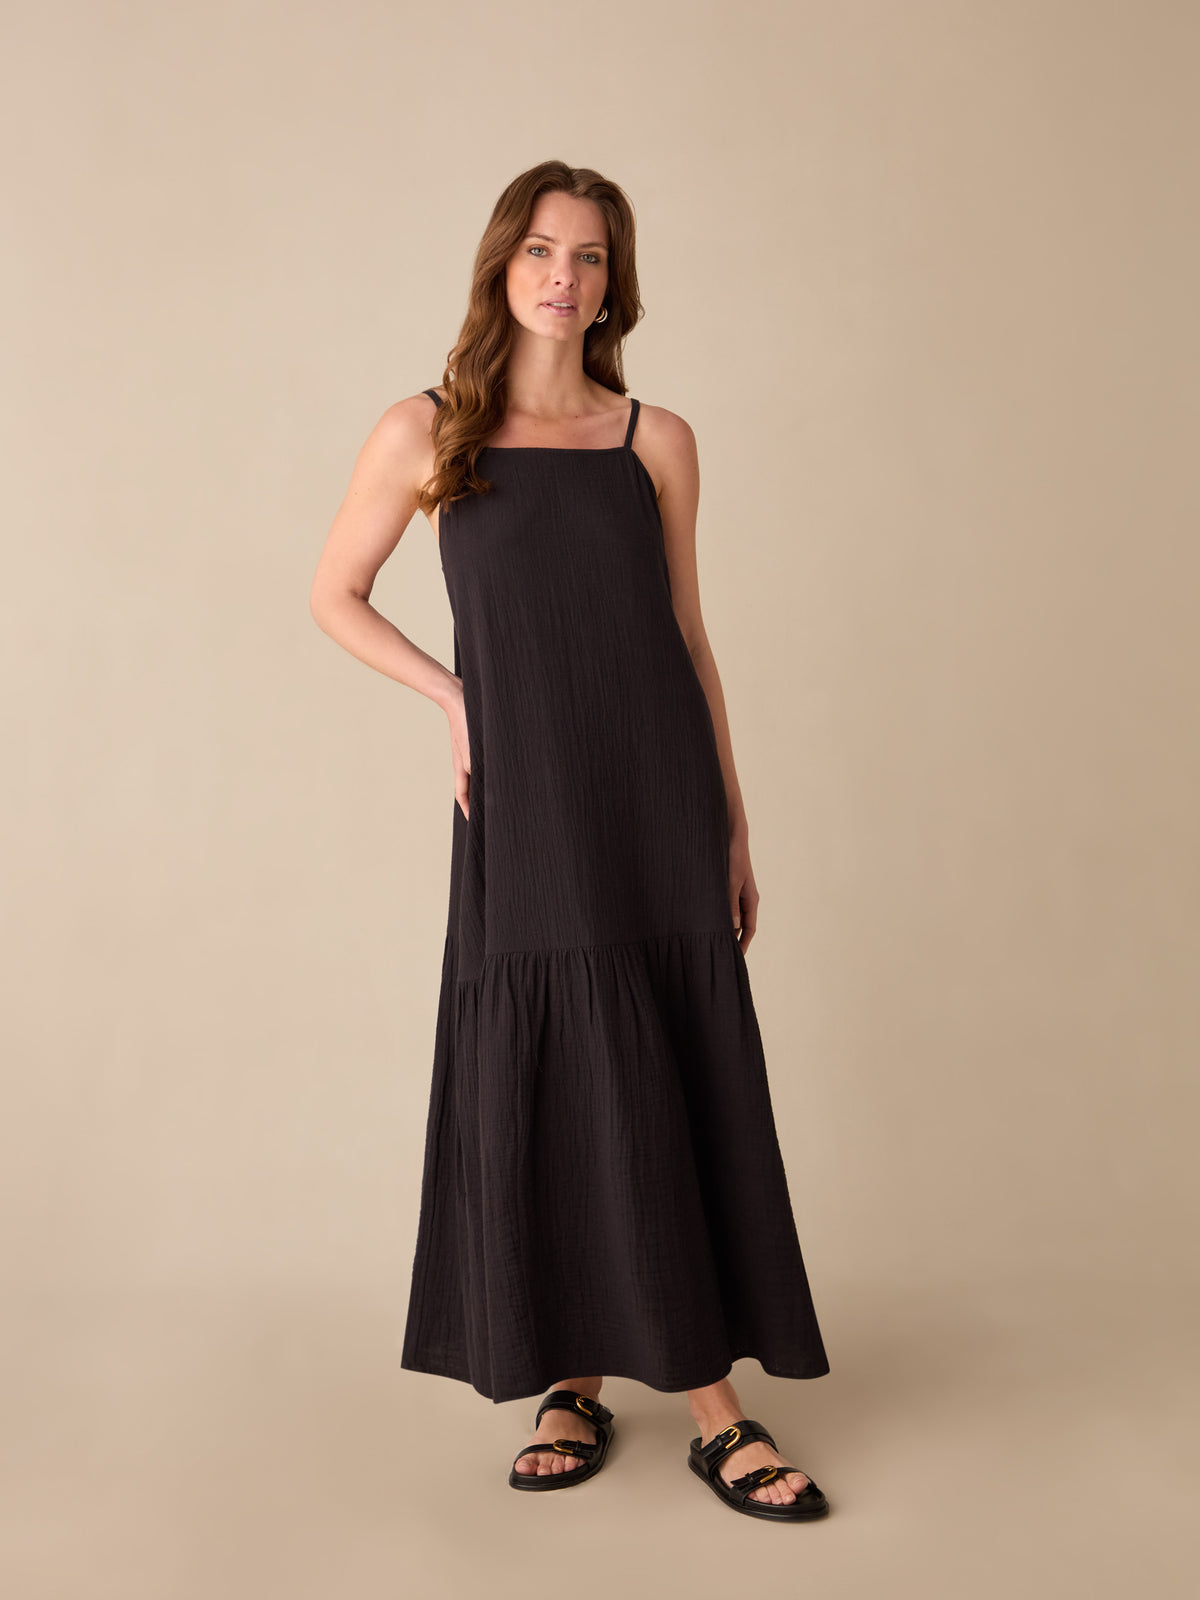 Petite Black Tiered Hem Strappy Cheesecloth Dress